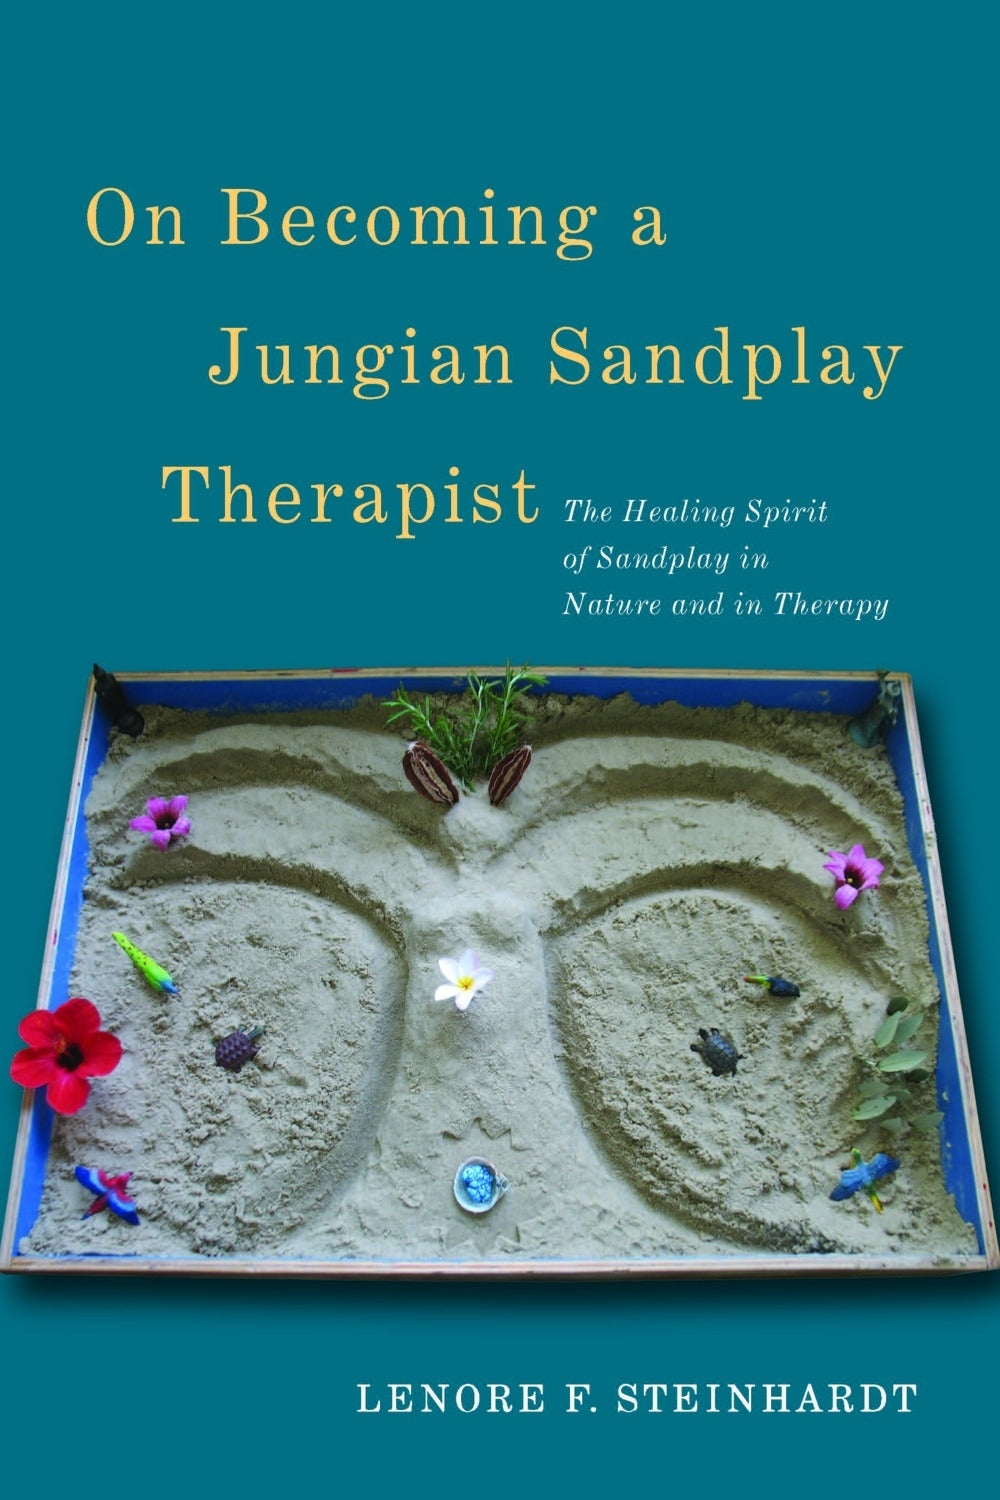 On Becoming a Jungian Sandplay Therapist by Lenore Steinhardt